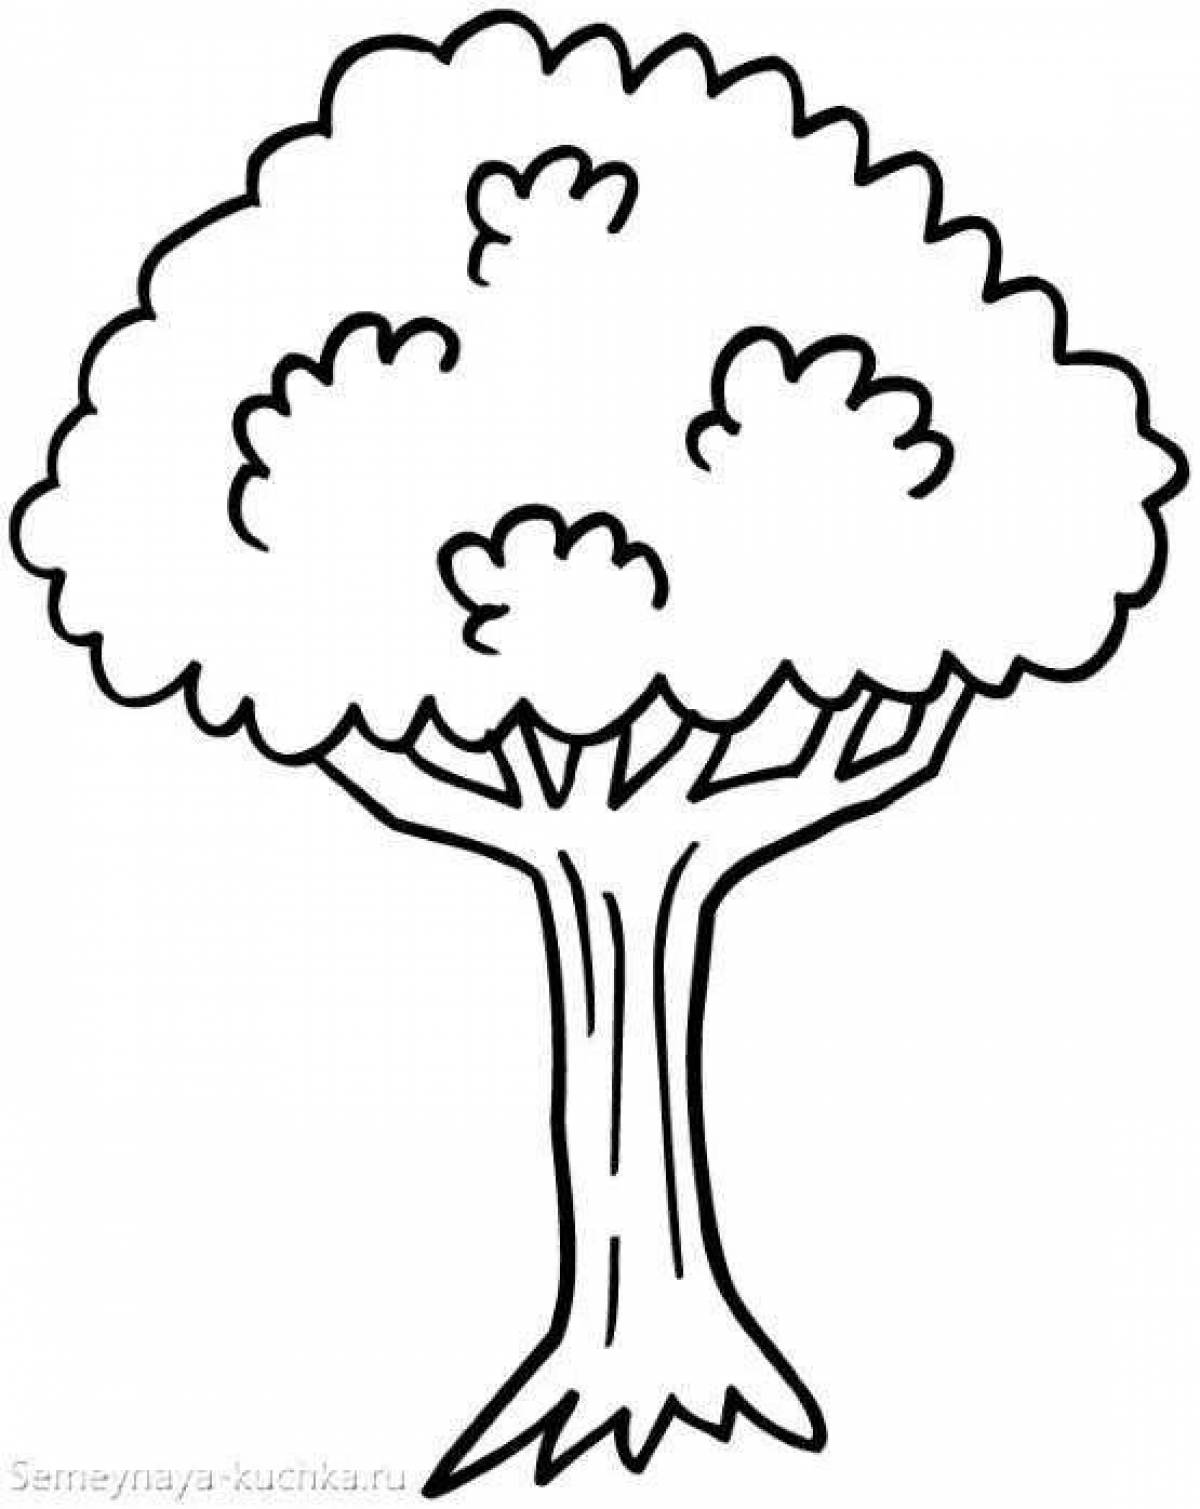 Radiant tree coloring page